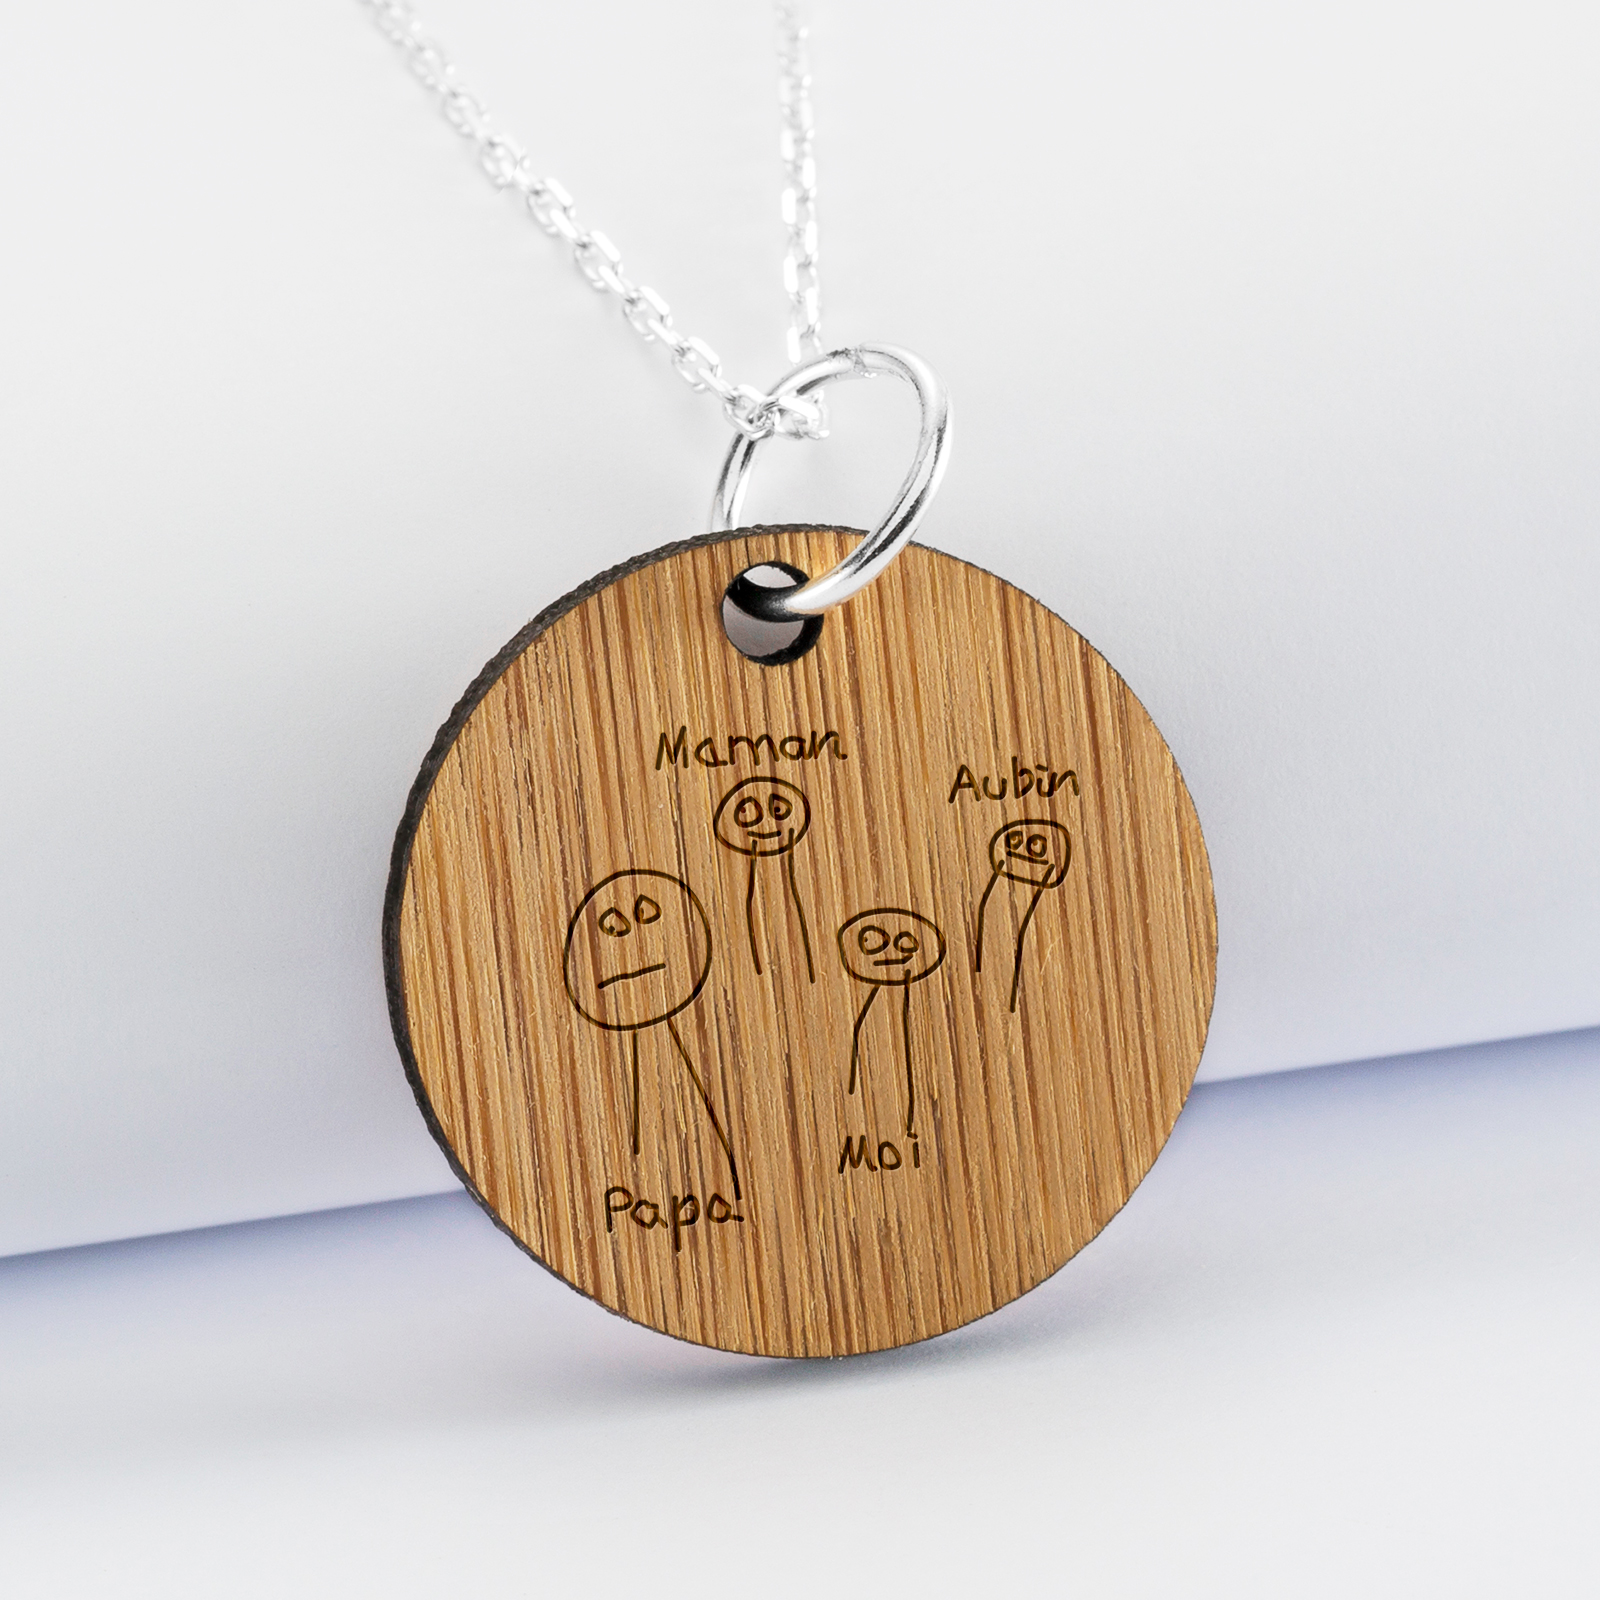 Personalised engraved wooden round medallion pendant 28 mm - sketch